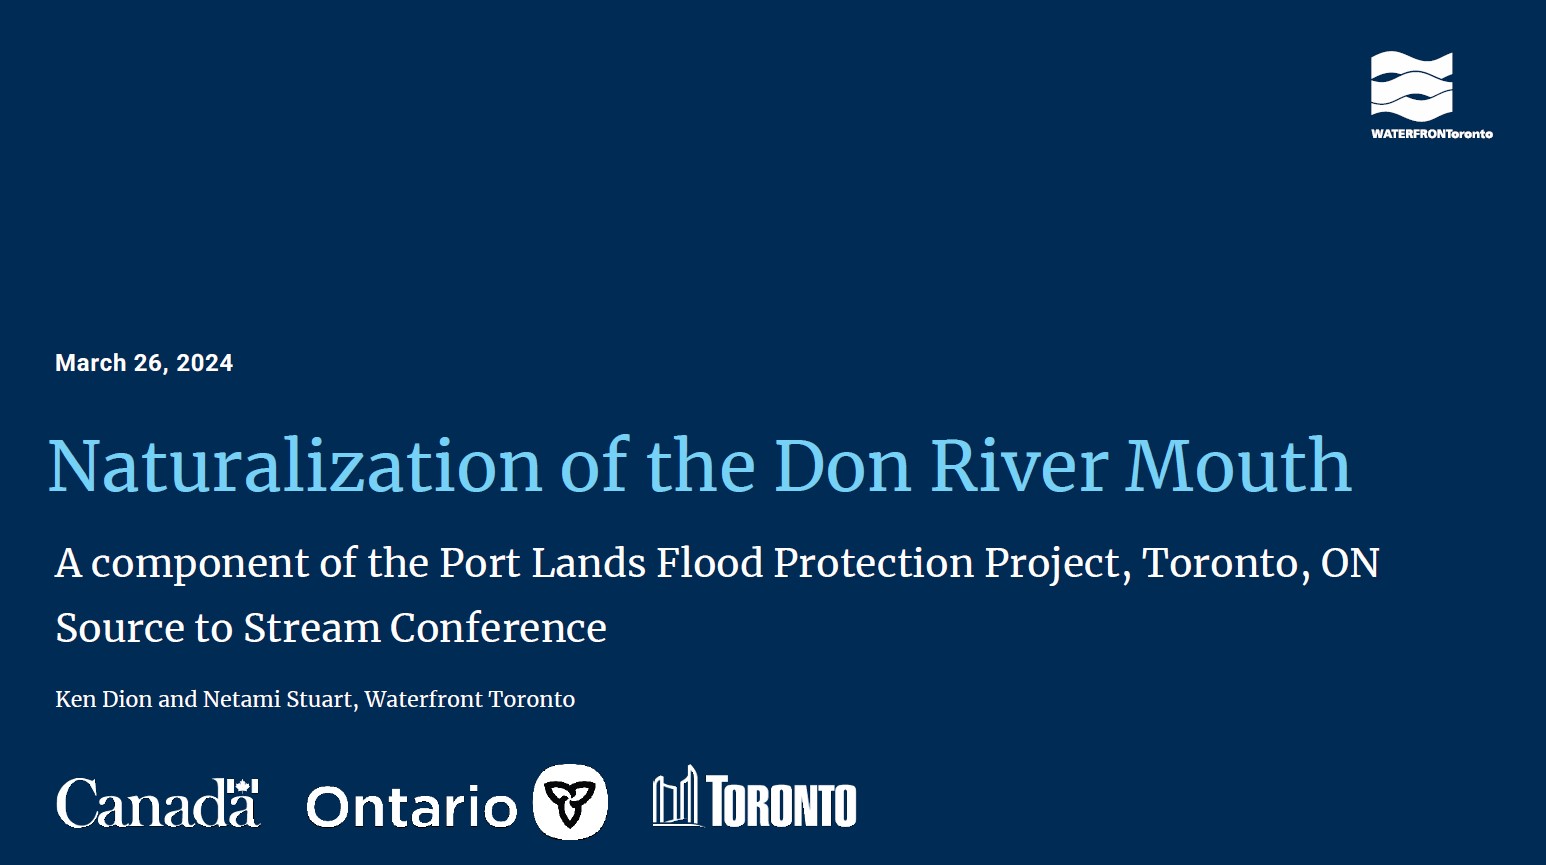 Naturalization of the Don River Mouth A component of the Port Lands Flood Protection Project, Toronto ON Source to Stream Conference - Presentation by Ken Dion and Netami Stuart